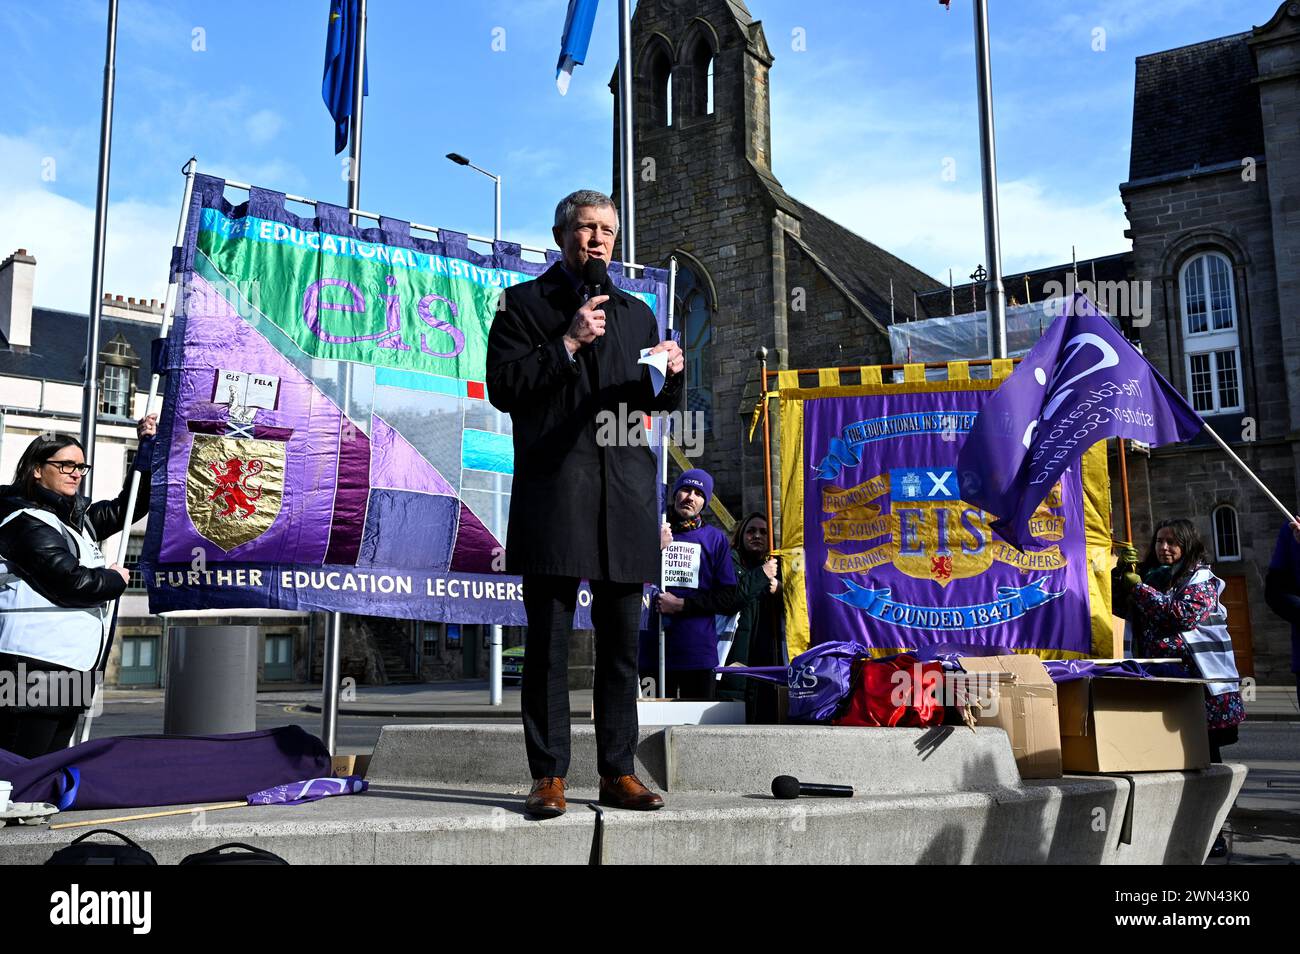 Edinburgh, Scotland, UK. 29th February 2024.  Rally by EIS FELA and Unison protesting against the planned funding cuts to further education and for a fair pay rise, protest at the Scottish parliament Holyrood. Scottish Liberal Democrat MSP Willie Rennie addressing the crowd. Credit: Craig Brown/Alamy Live News Stock Photo